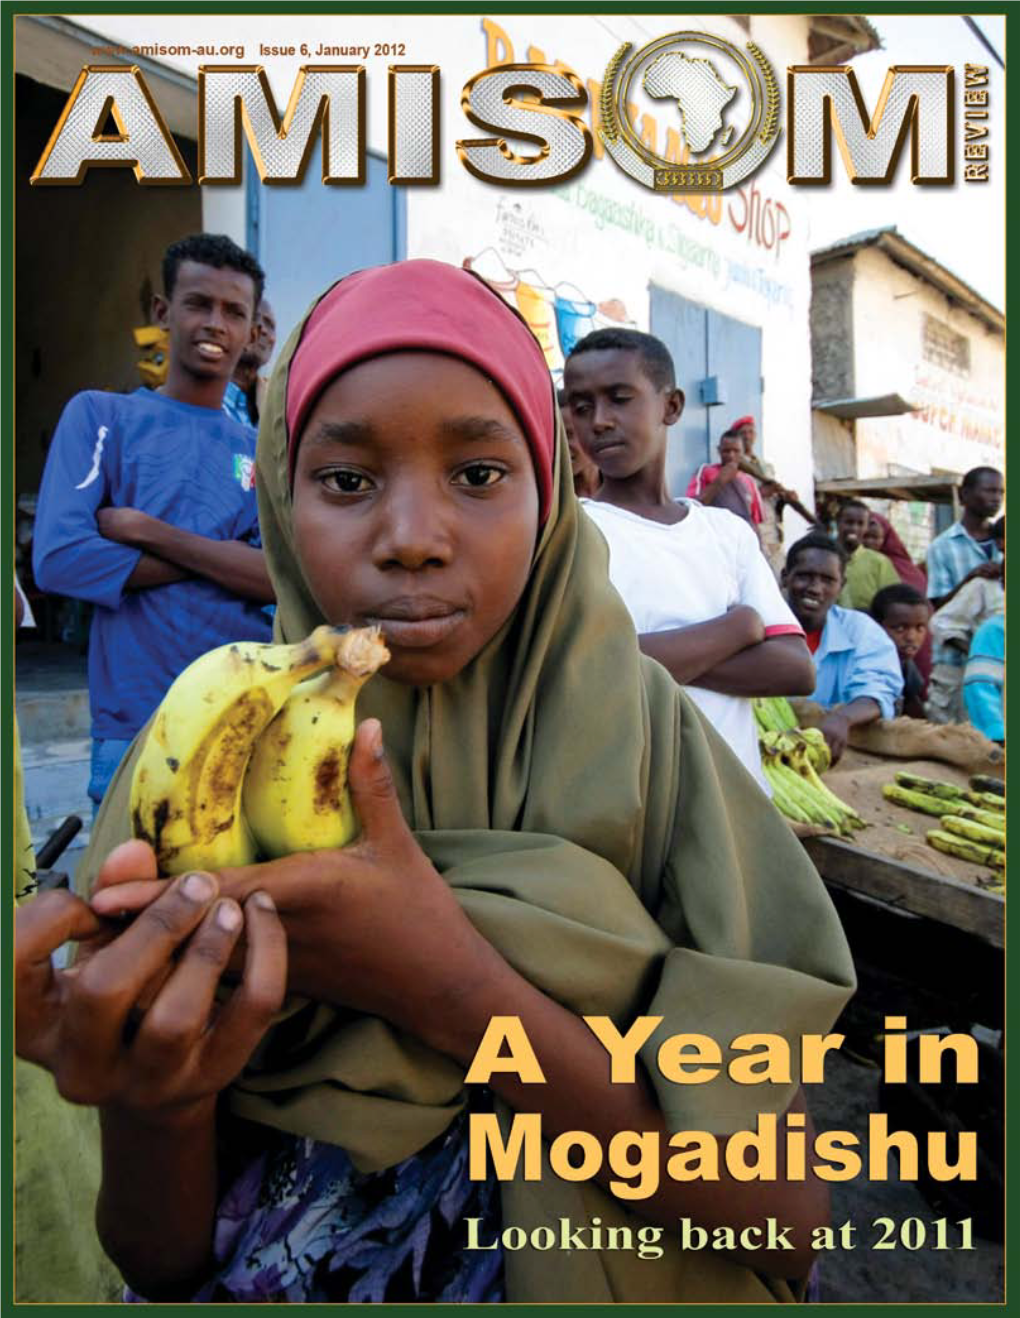 This, the First Issue of the AMISOM Review in Have Also Added Their Weight in the West, Helping the TFG Liberate 2012